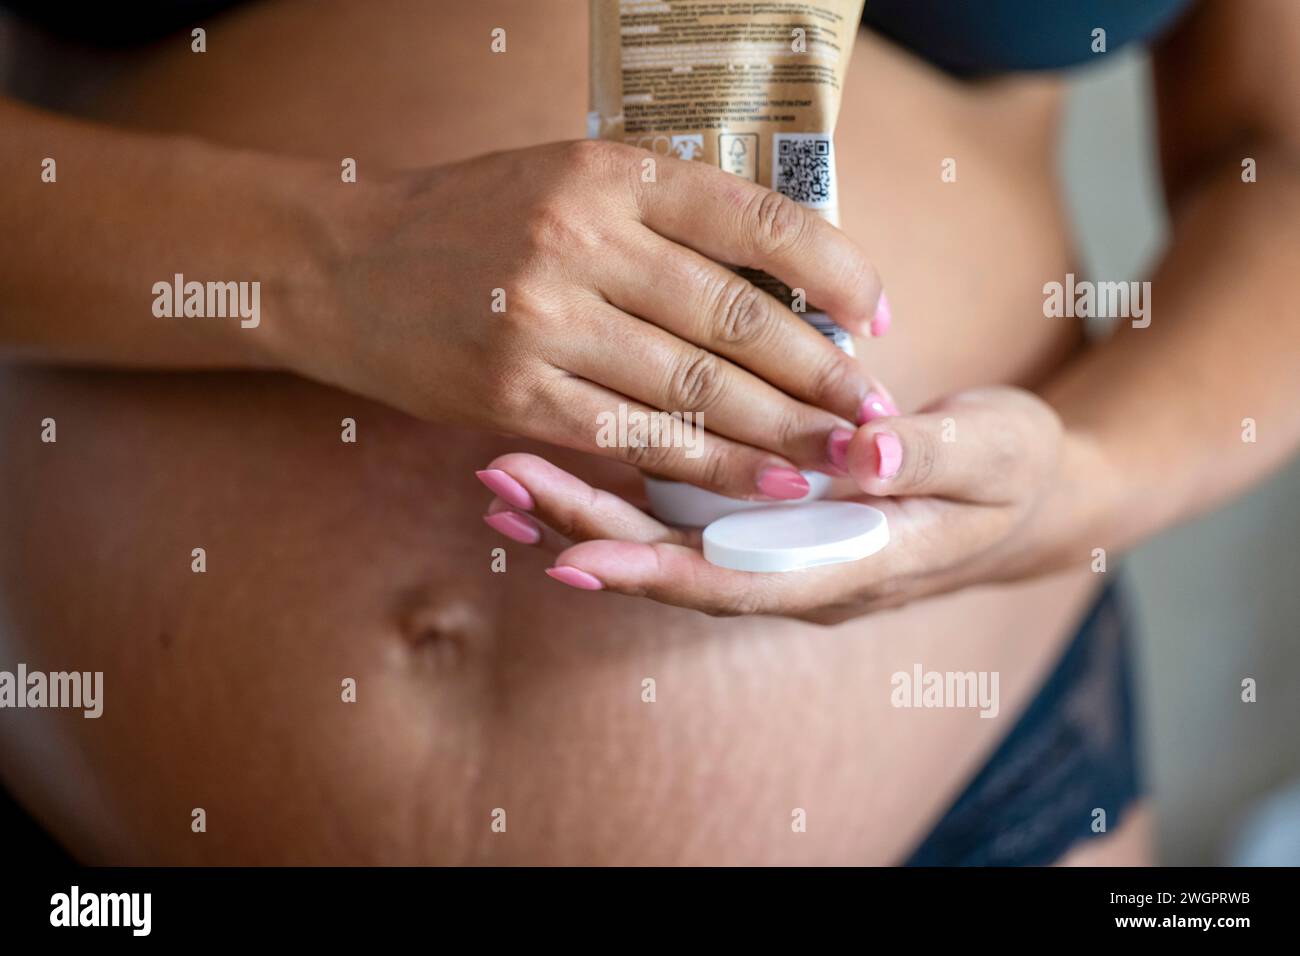 Pregnant mother applying cream to her tummy Stock Photo